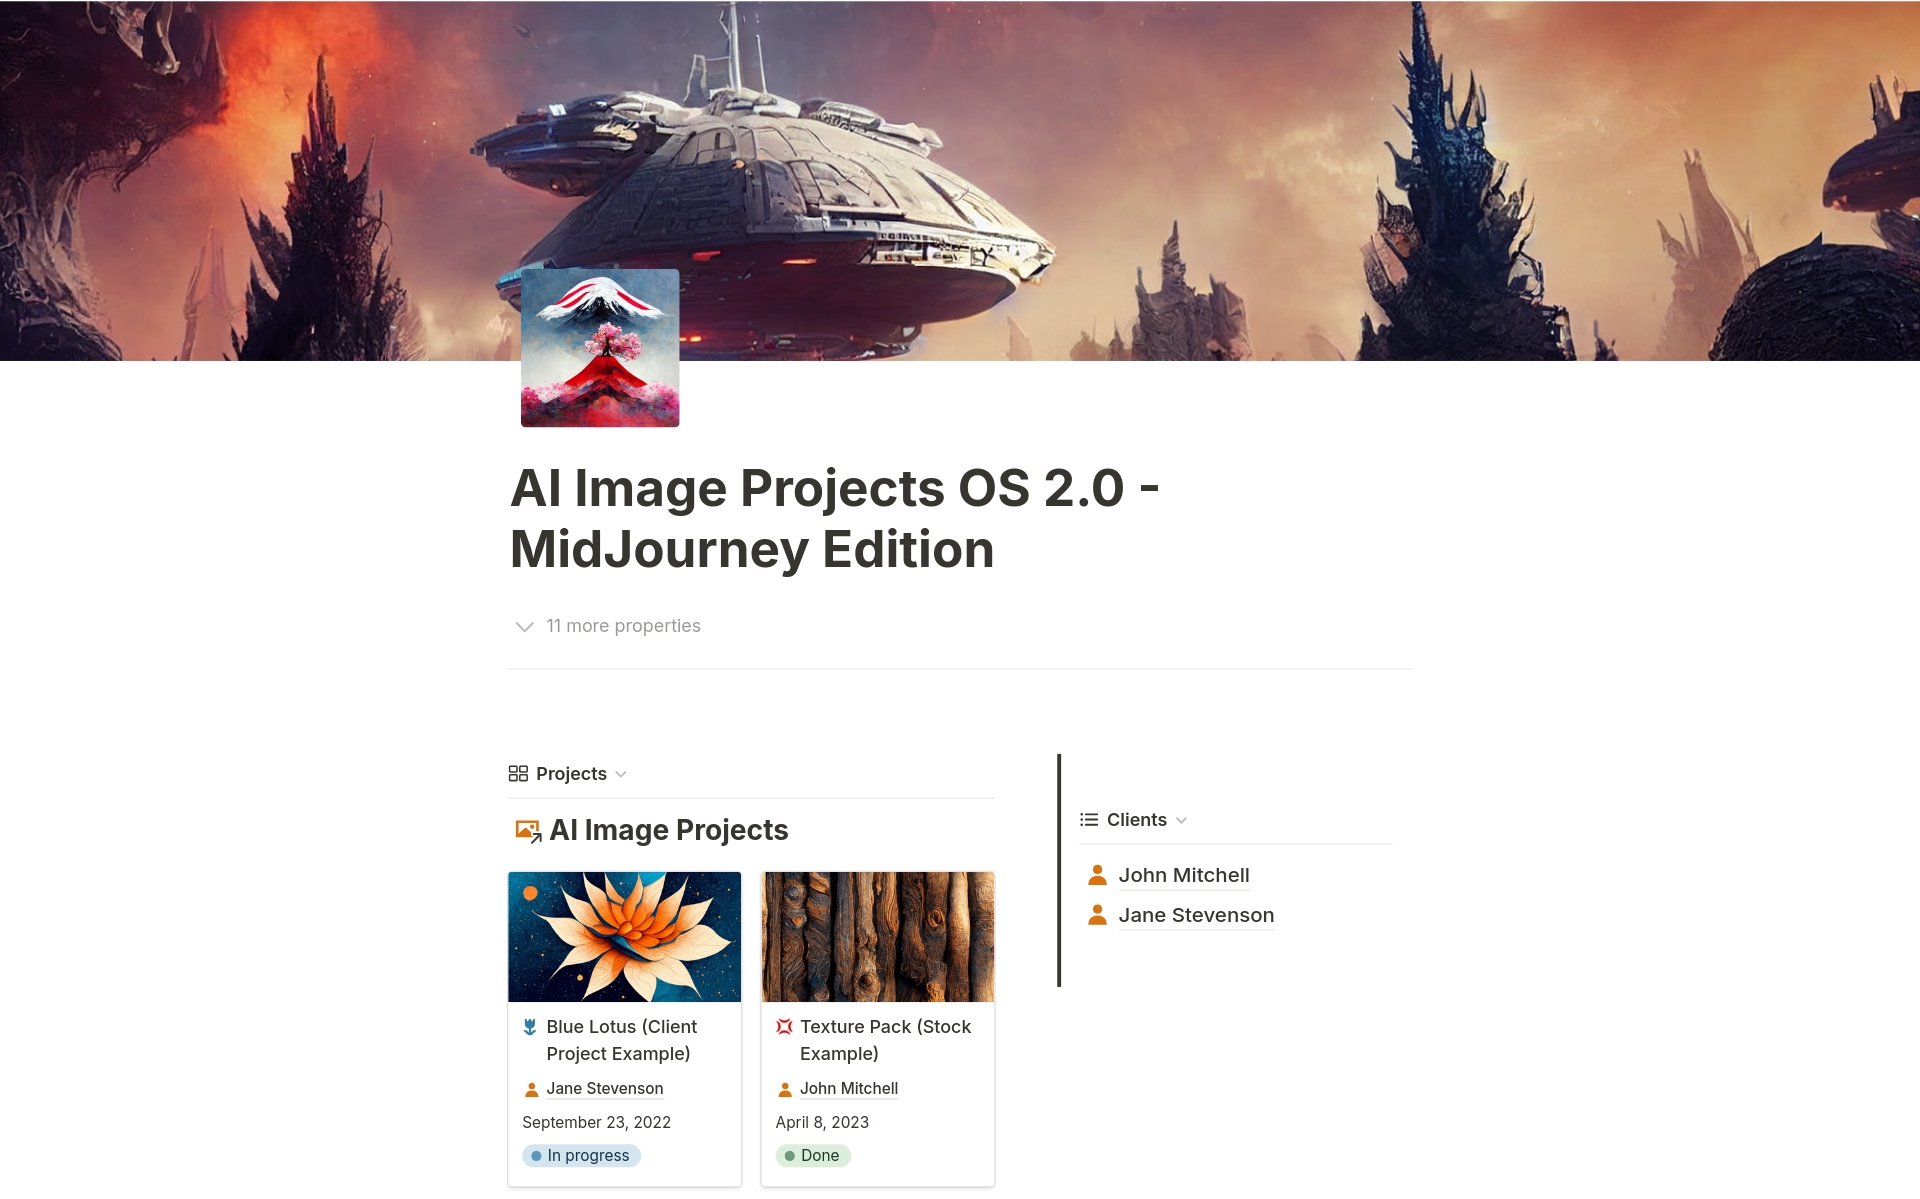 This OS offers a full creative package for you to make money with image generation tools. With MidJourney-ready prompt creation, invoice generation, keyword research, and rights management you can transform your ideas into a finished product.